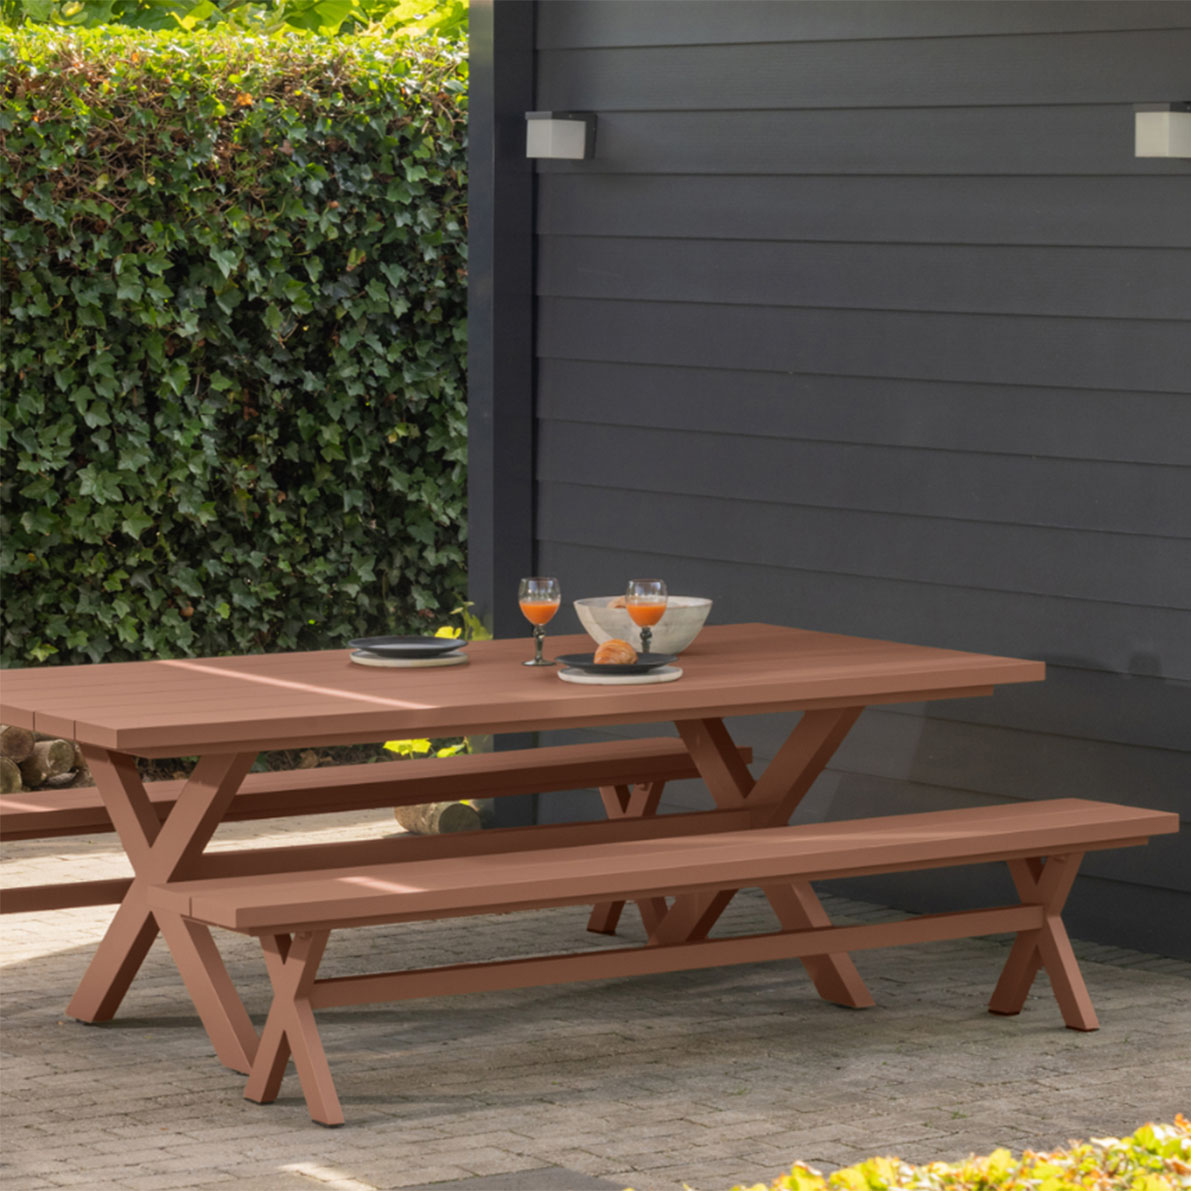 DELTA DINING TABLE OUTDOOR 2